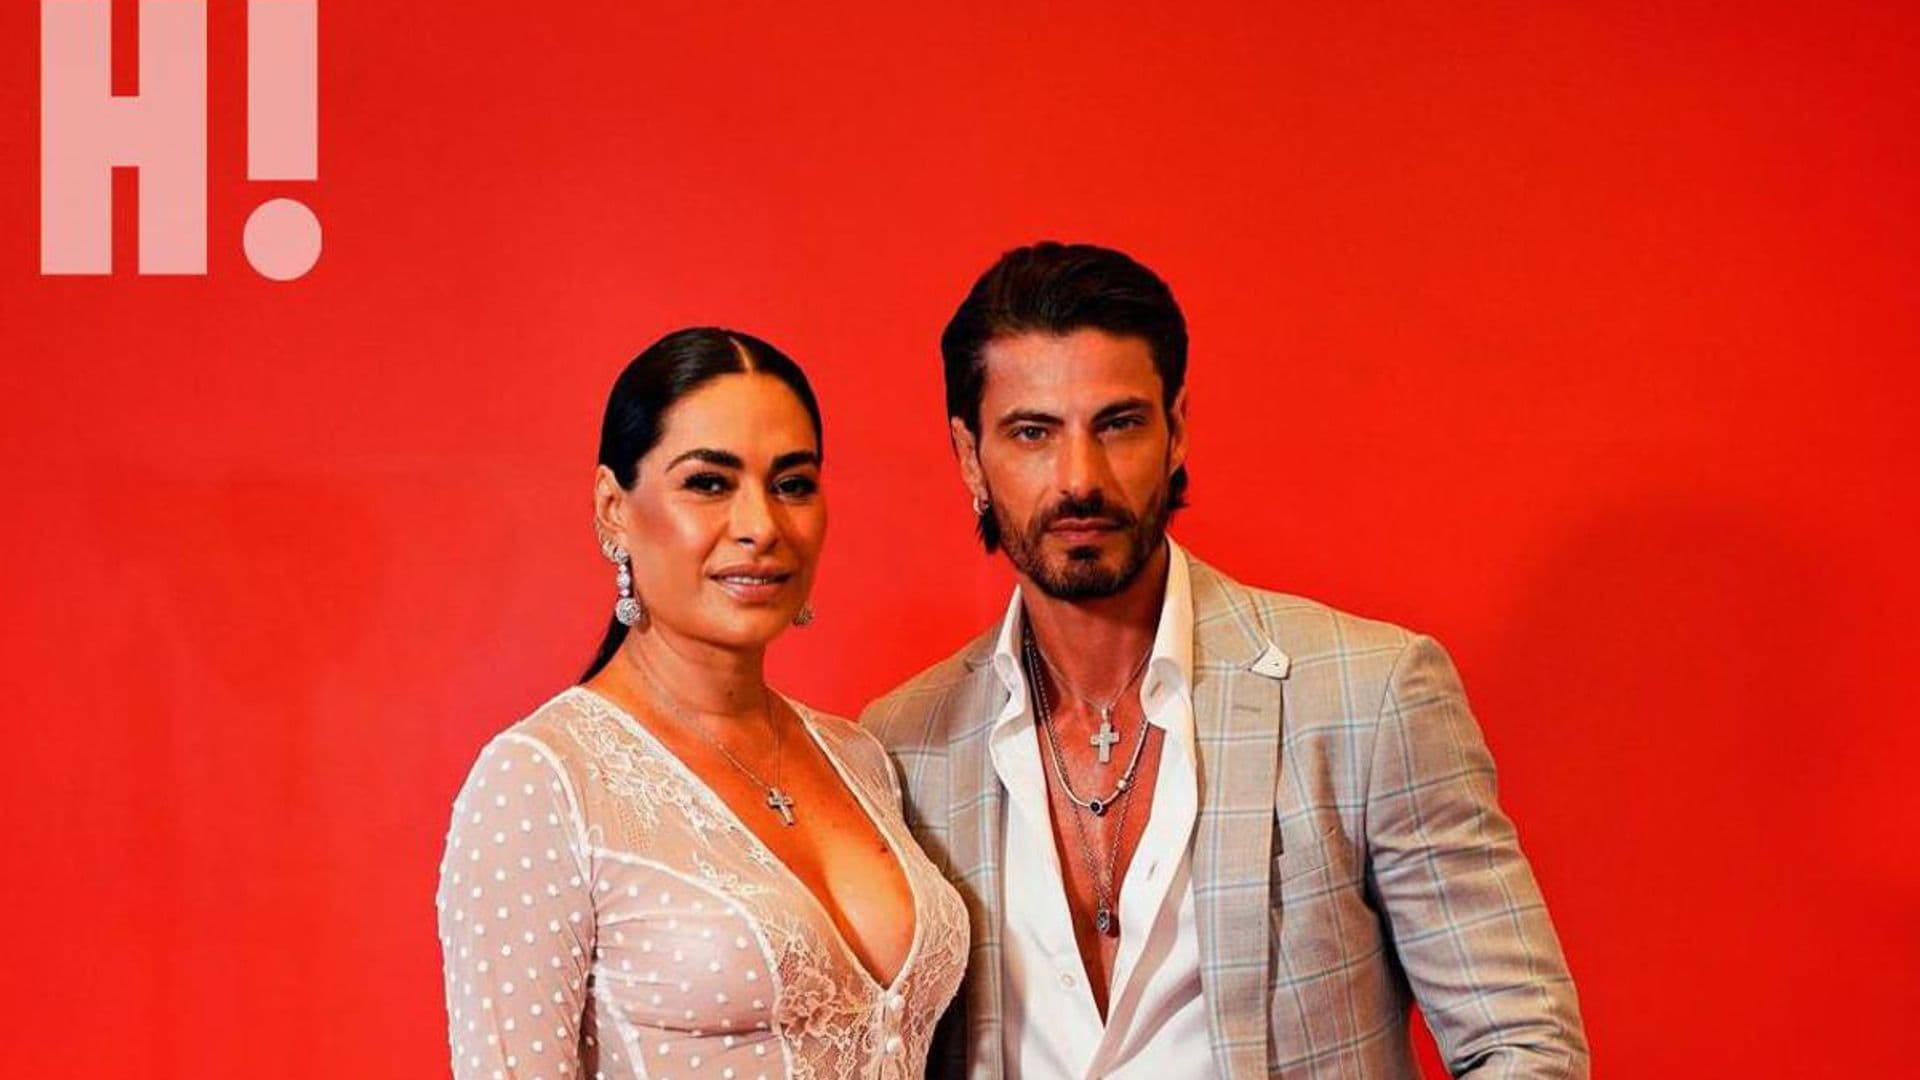 Galilea Montijo and her boyfriend speak for the first time about their relationship